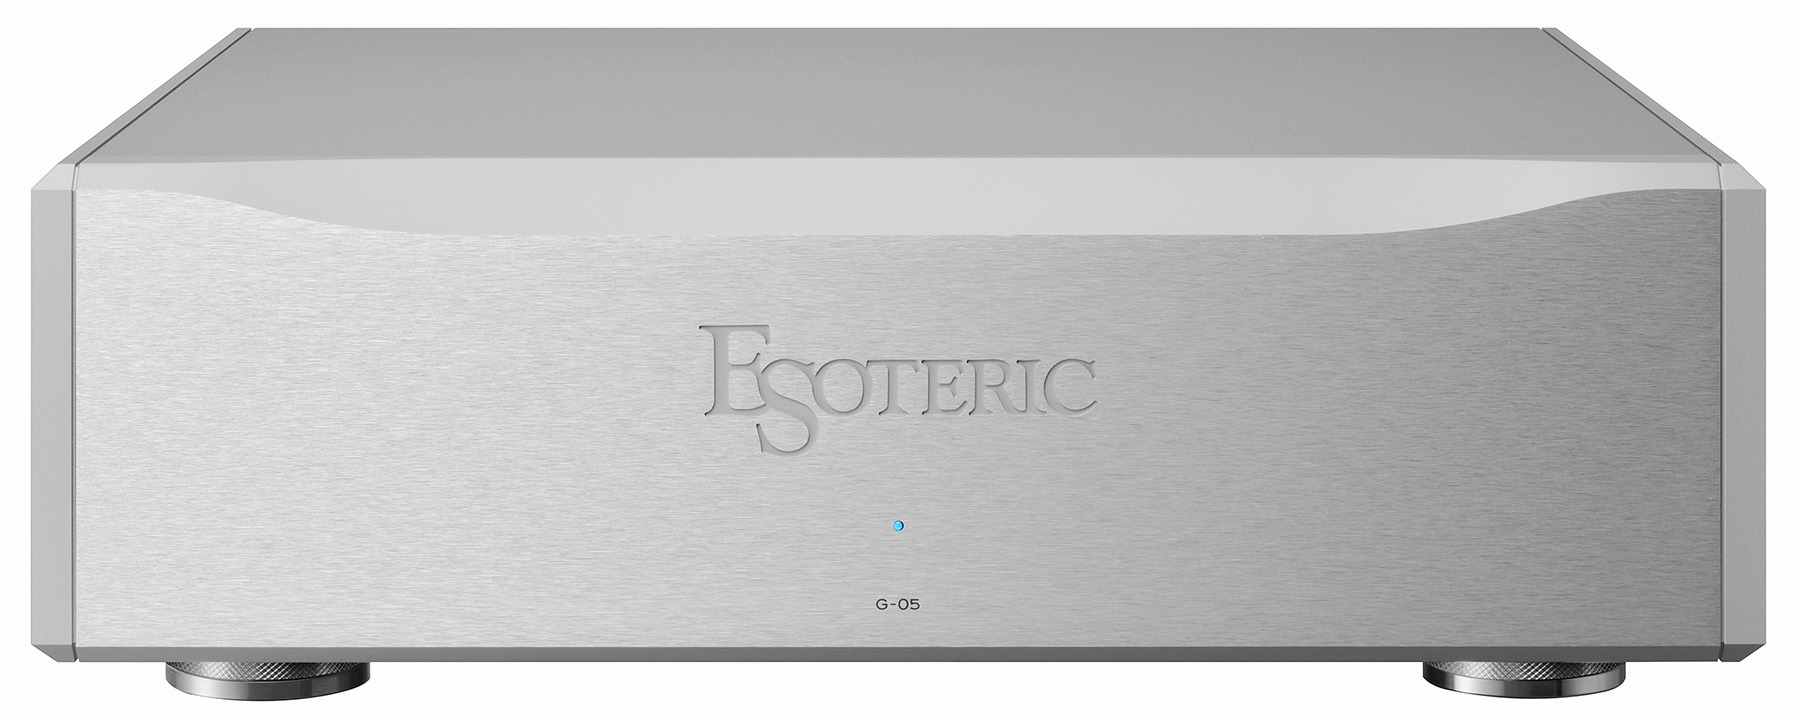 Стационарные ЦАПы Esoteric G-05 Silver home theater smart speaker system sound bar blue tooth with clock and alexa surround sound system optical no remote